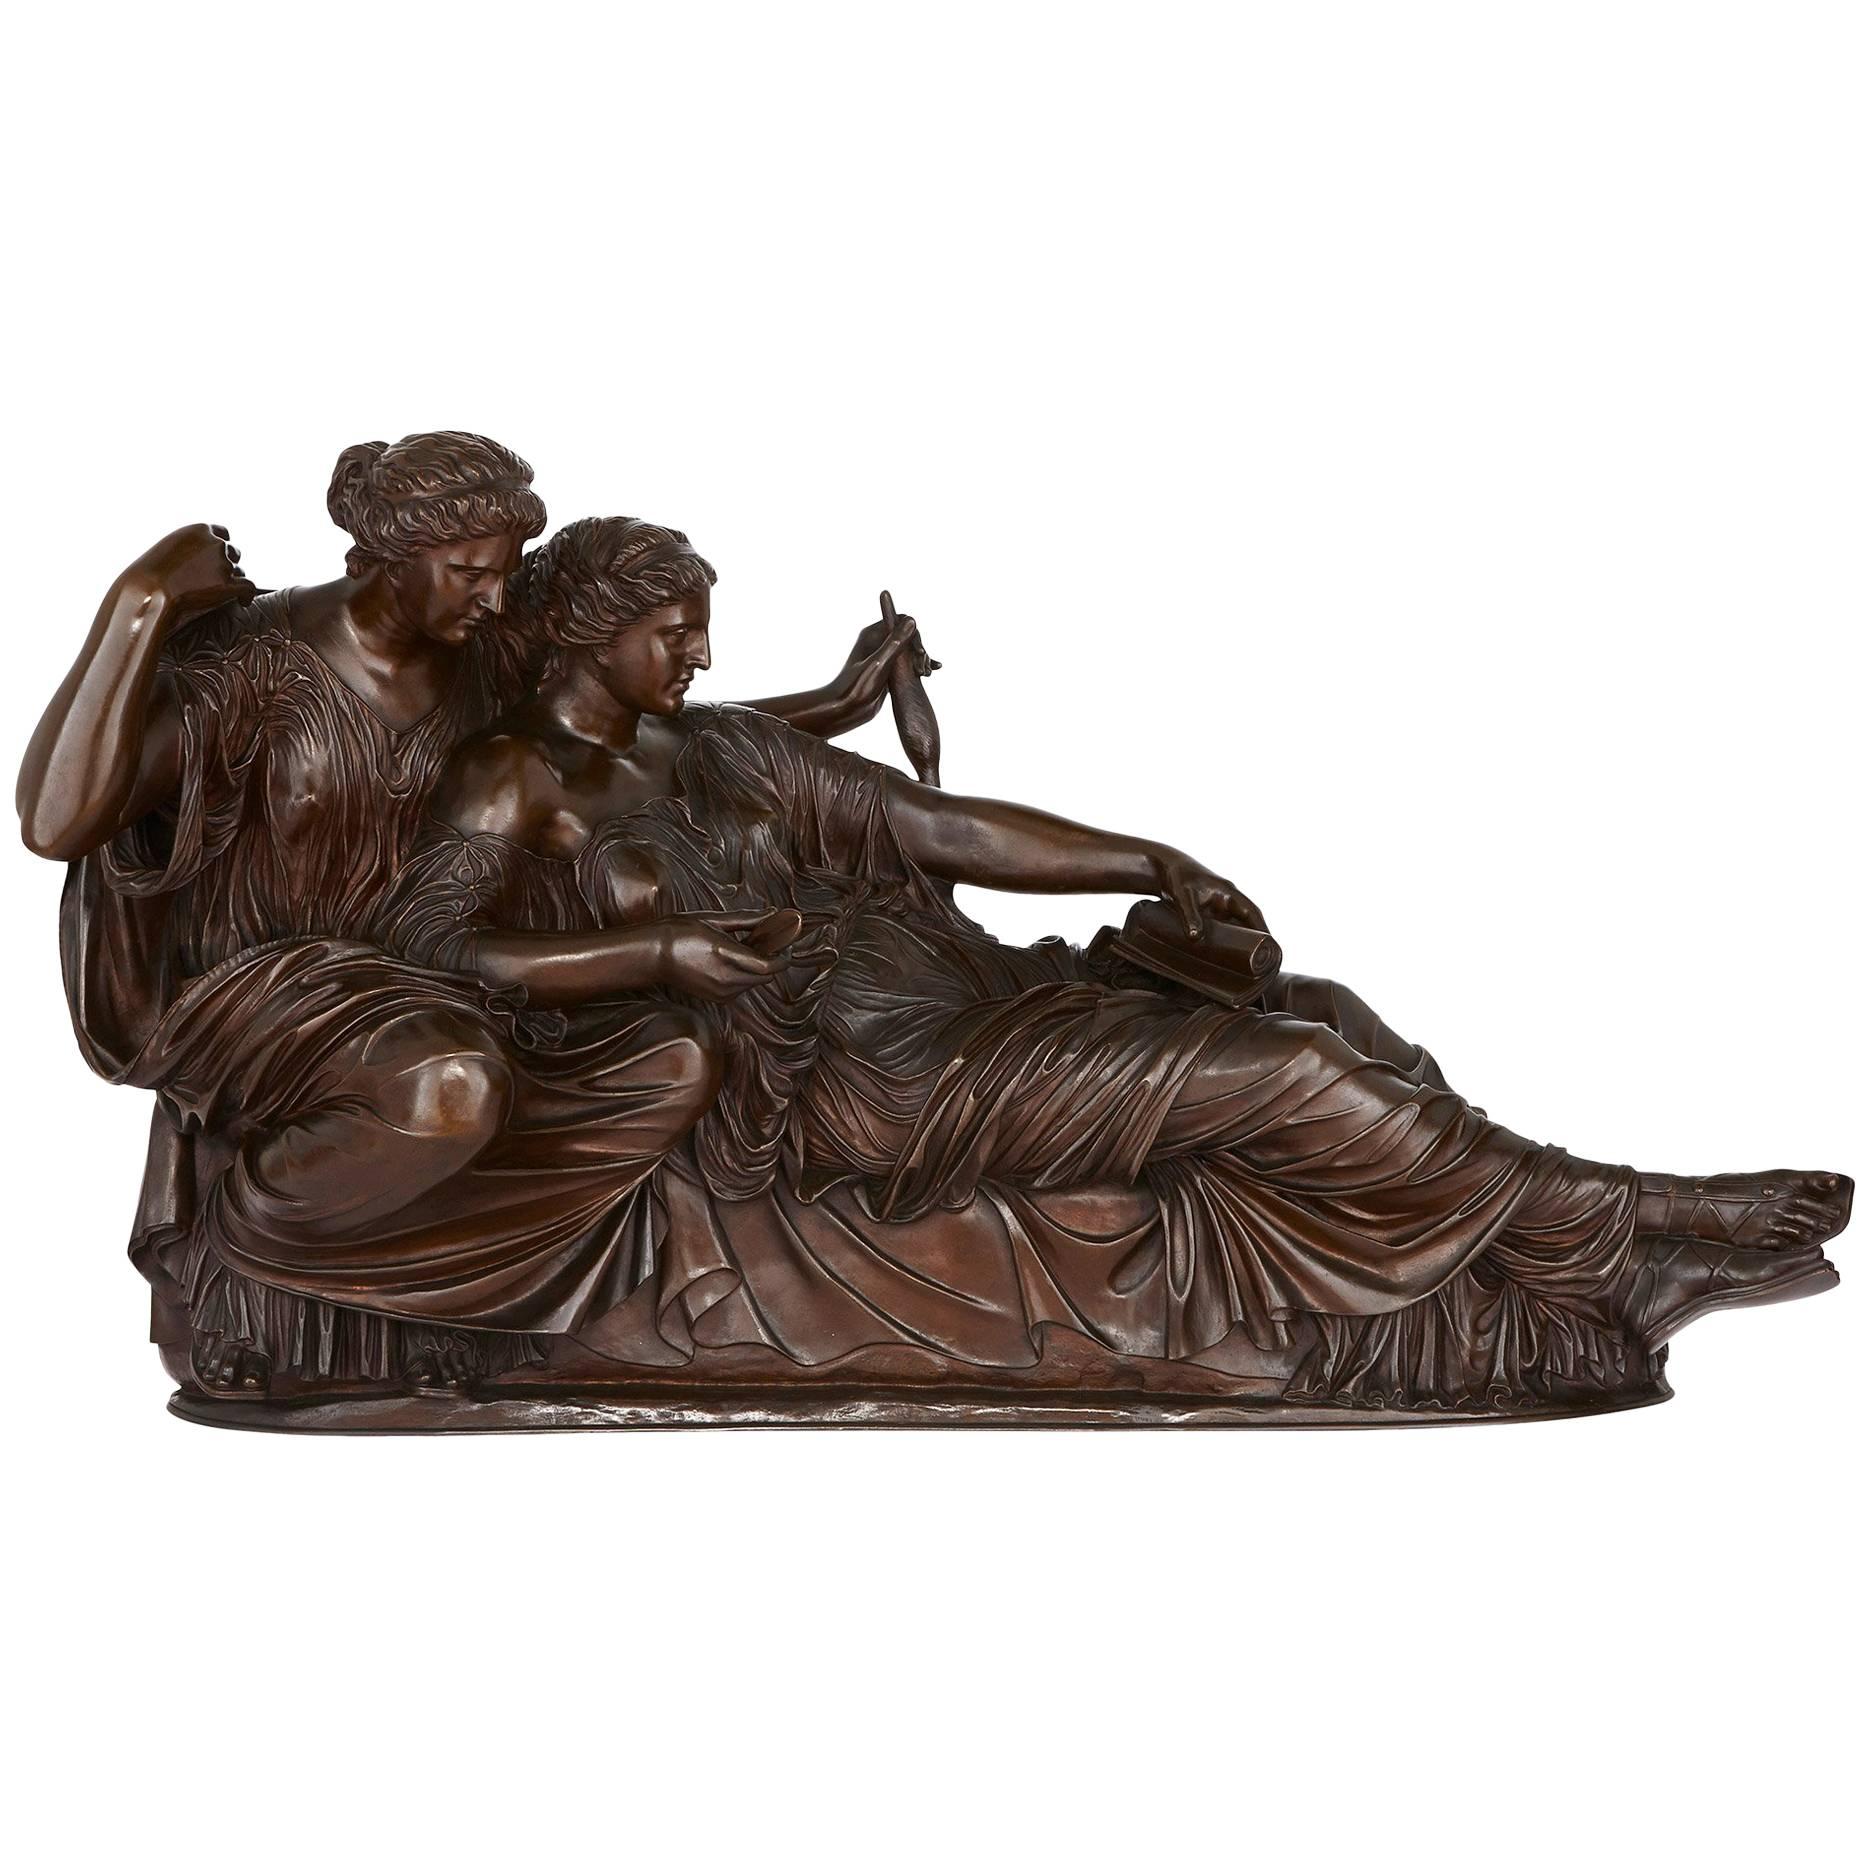 Large Antique Patinated Bronze Sculpture of the Two Fates by Barbedienne